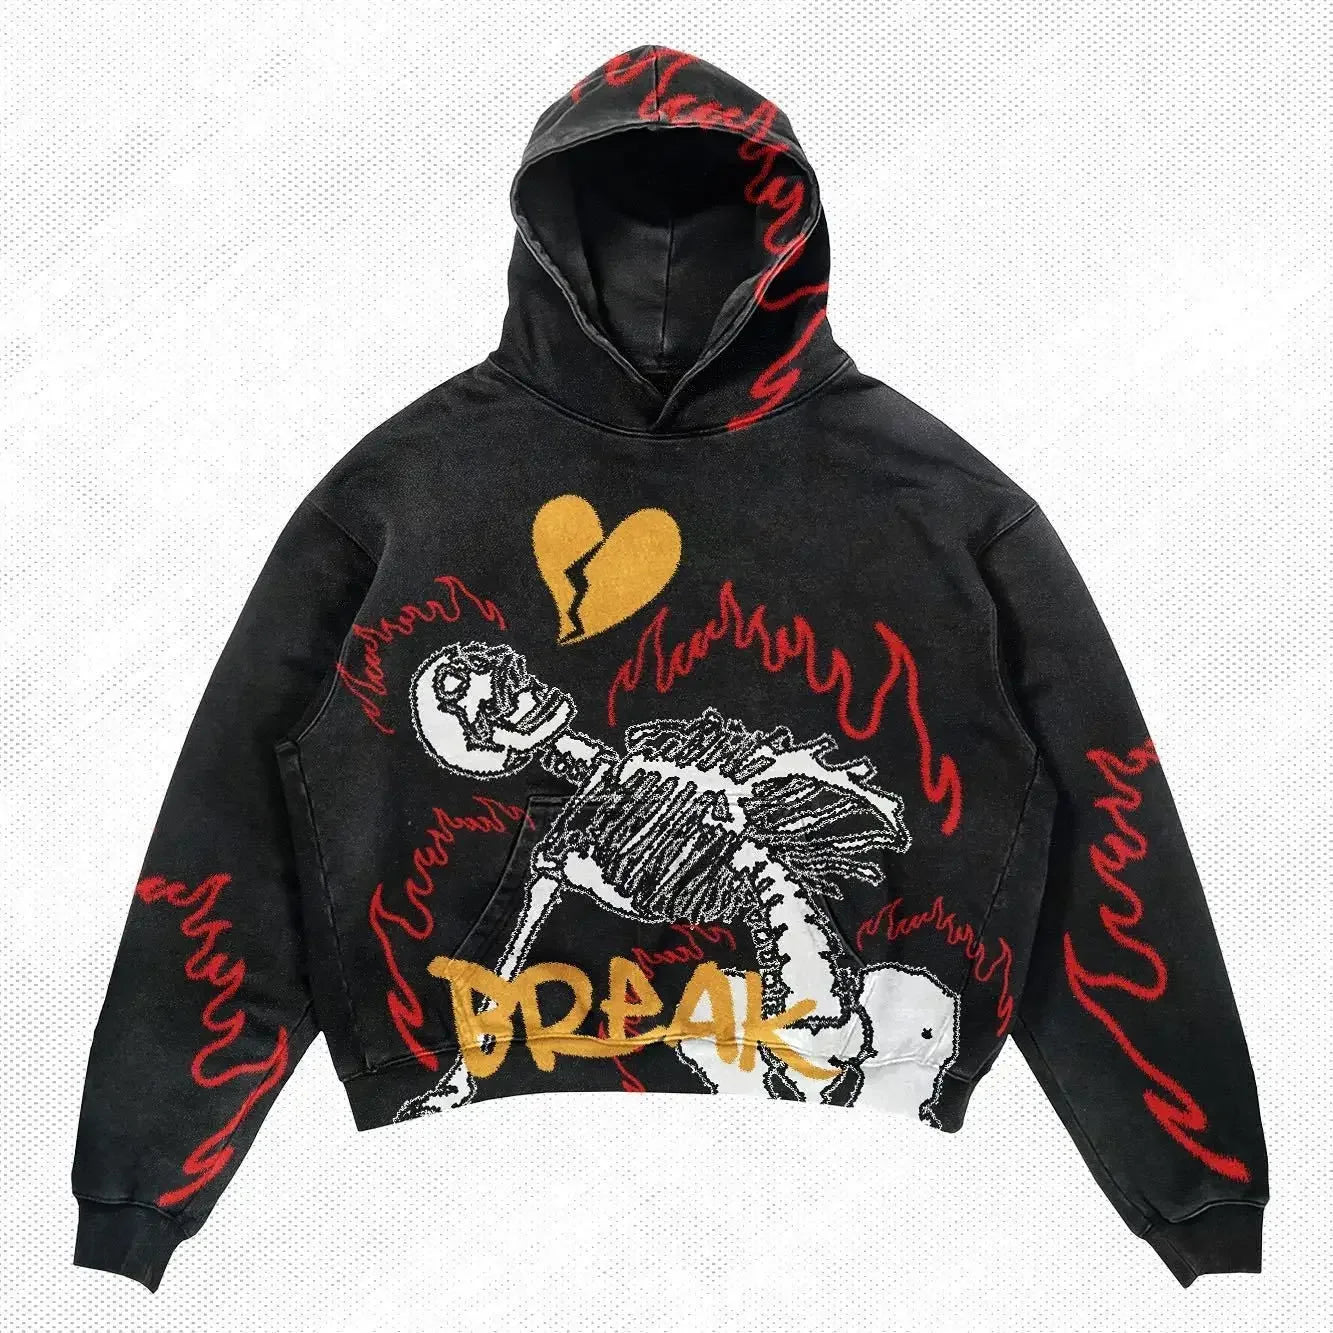 Black men's Maramalive™ Explosions Printed Skull Y2K Retro Hooded Sweater Coat Street Style Gothic Casual Fashion Hooded Sweater Men's Female with a heartbroken skeleton design, surrounded by red flames. Perfect for four seasons clothing, the word "BREAK" is prominently printed on the front, making it a striking punk style hoodie.
